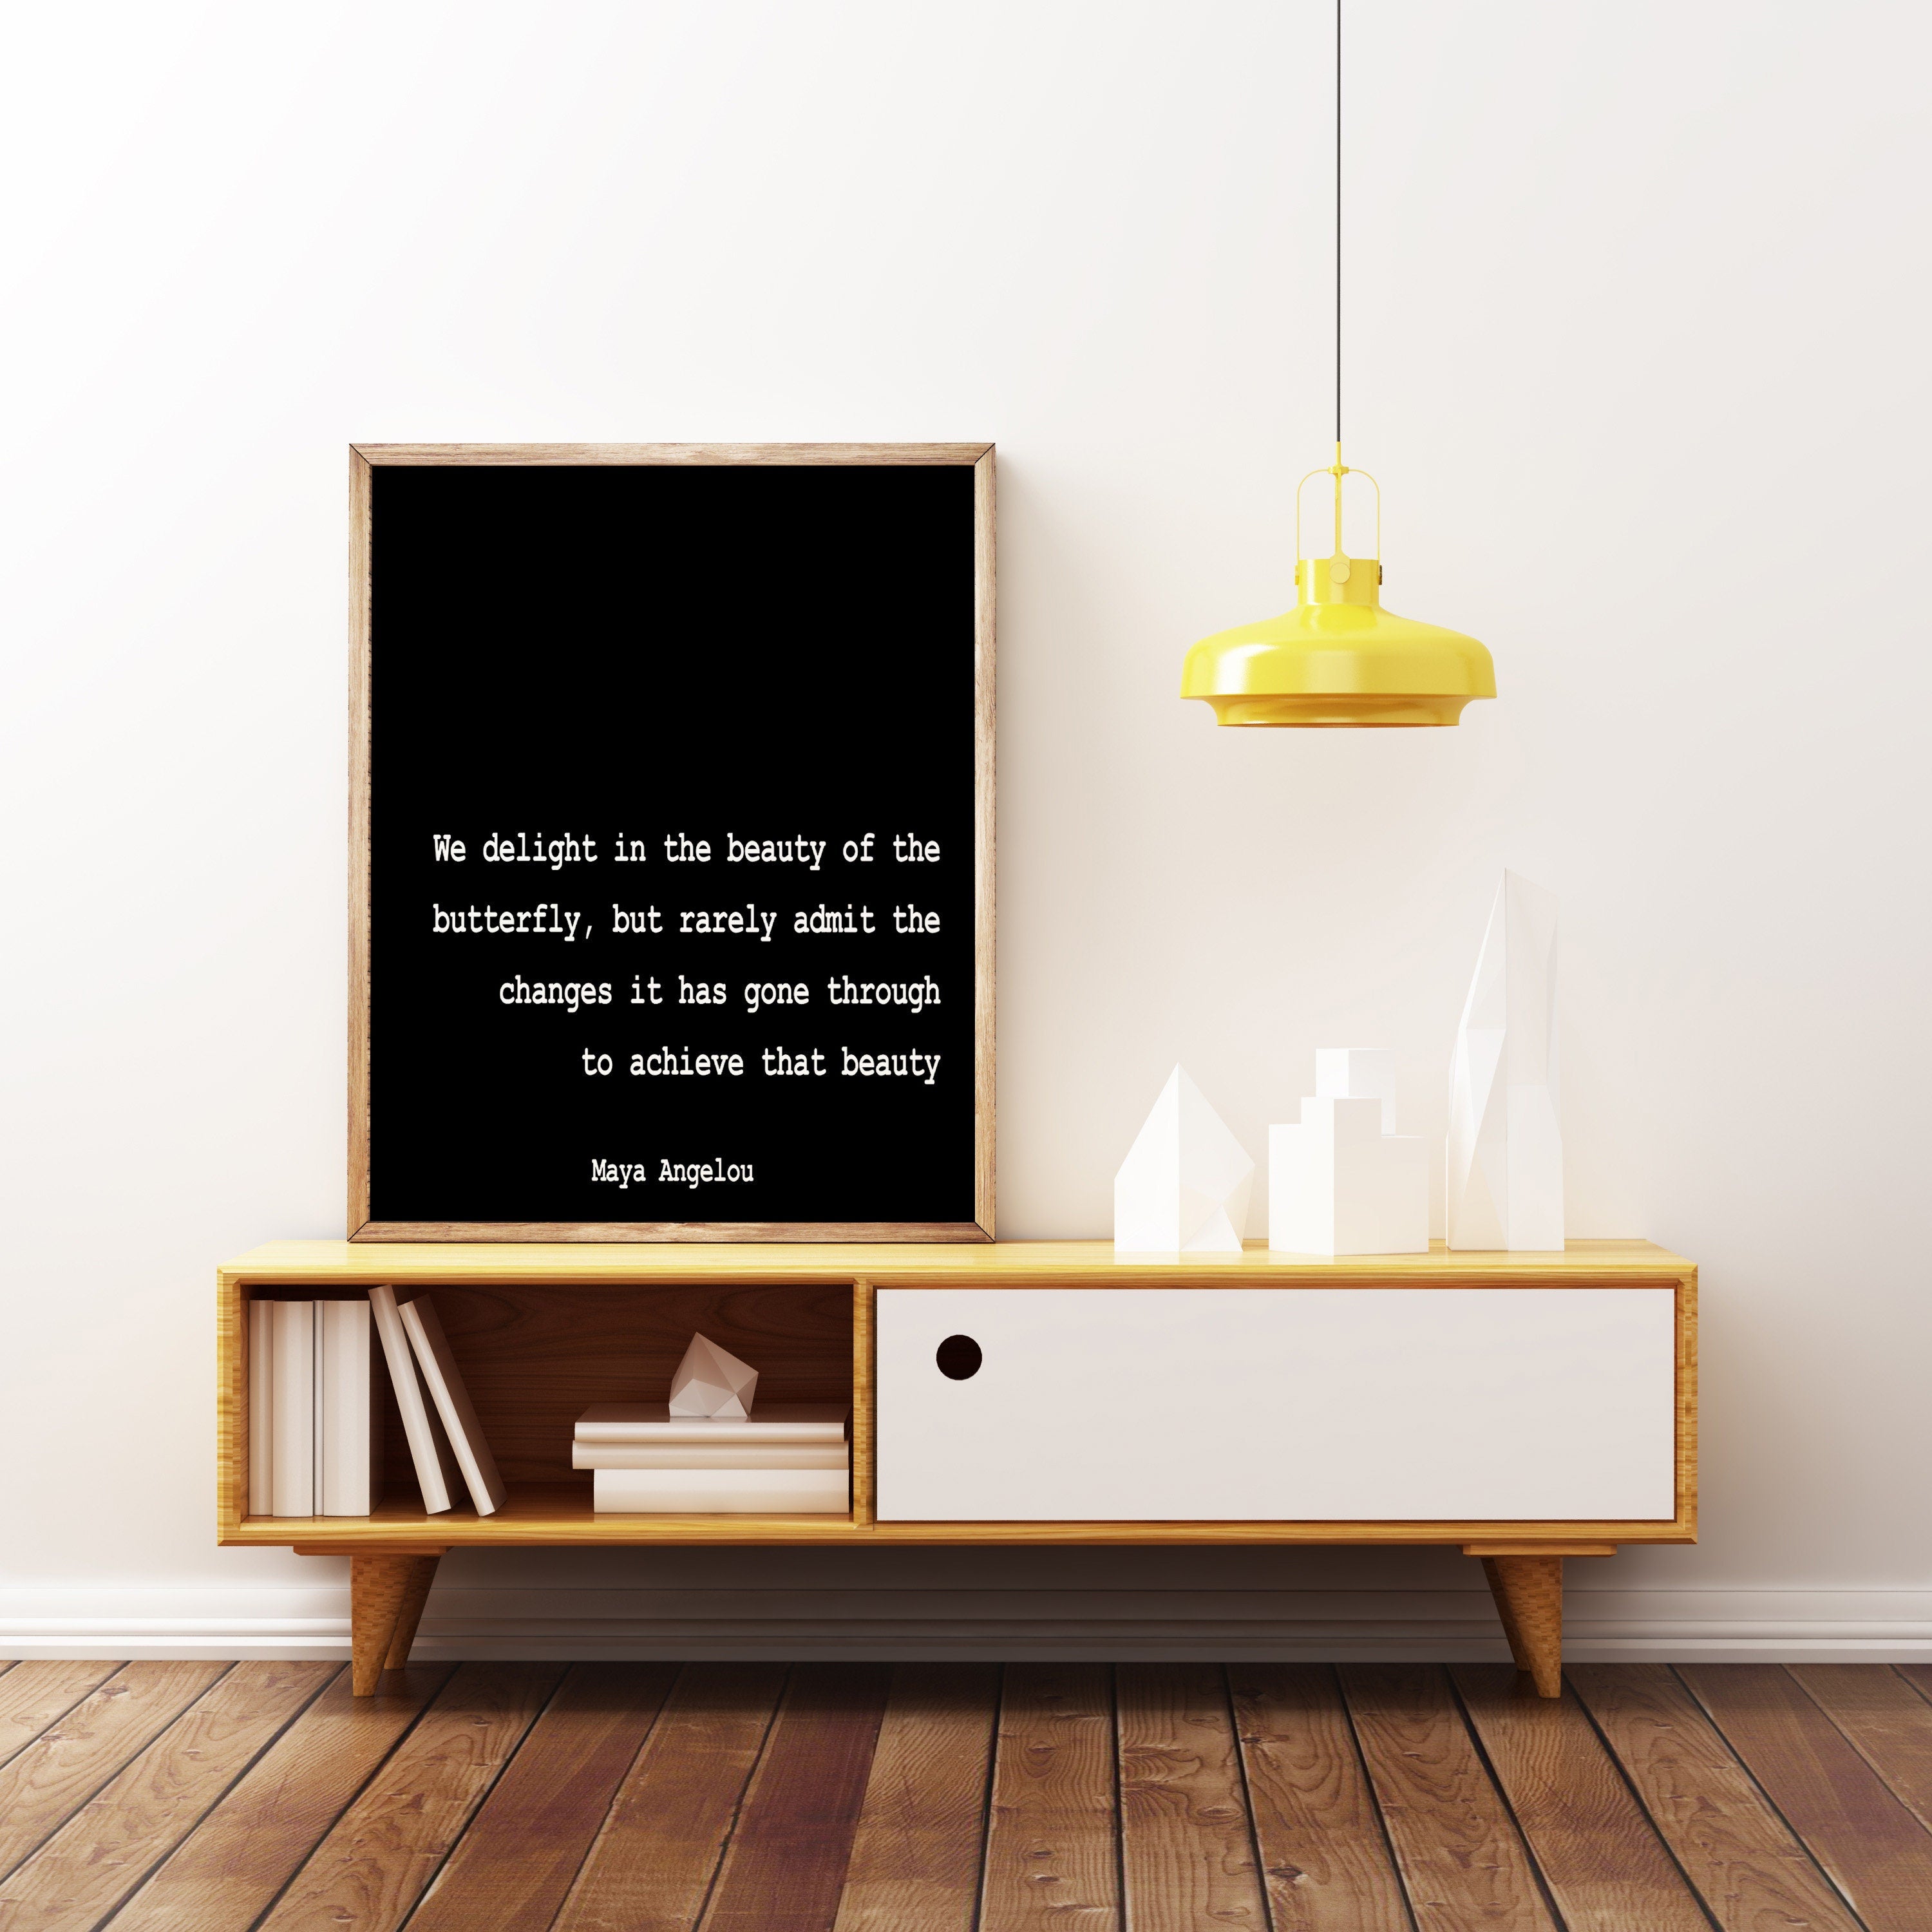 Maya Angelou Quote Print. We delight in the beauty of the butterfly, Life Quote Minimalist Art in Black & White